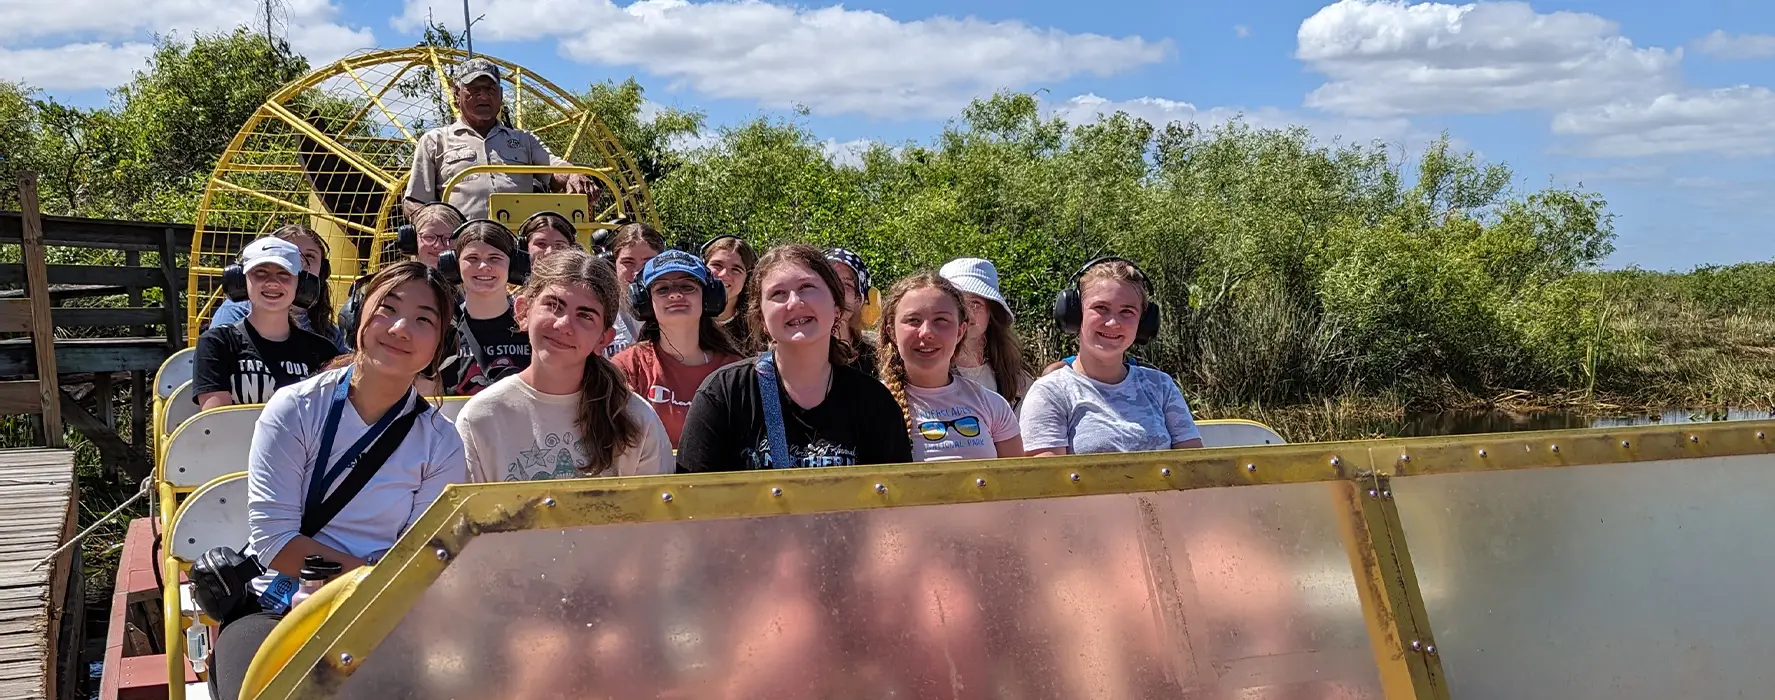 A group of students posing for a photo on a fanboat in Florida.